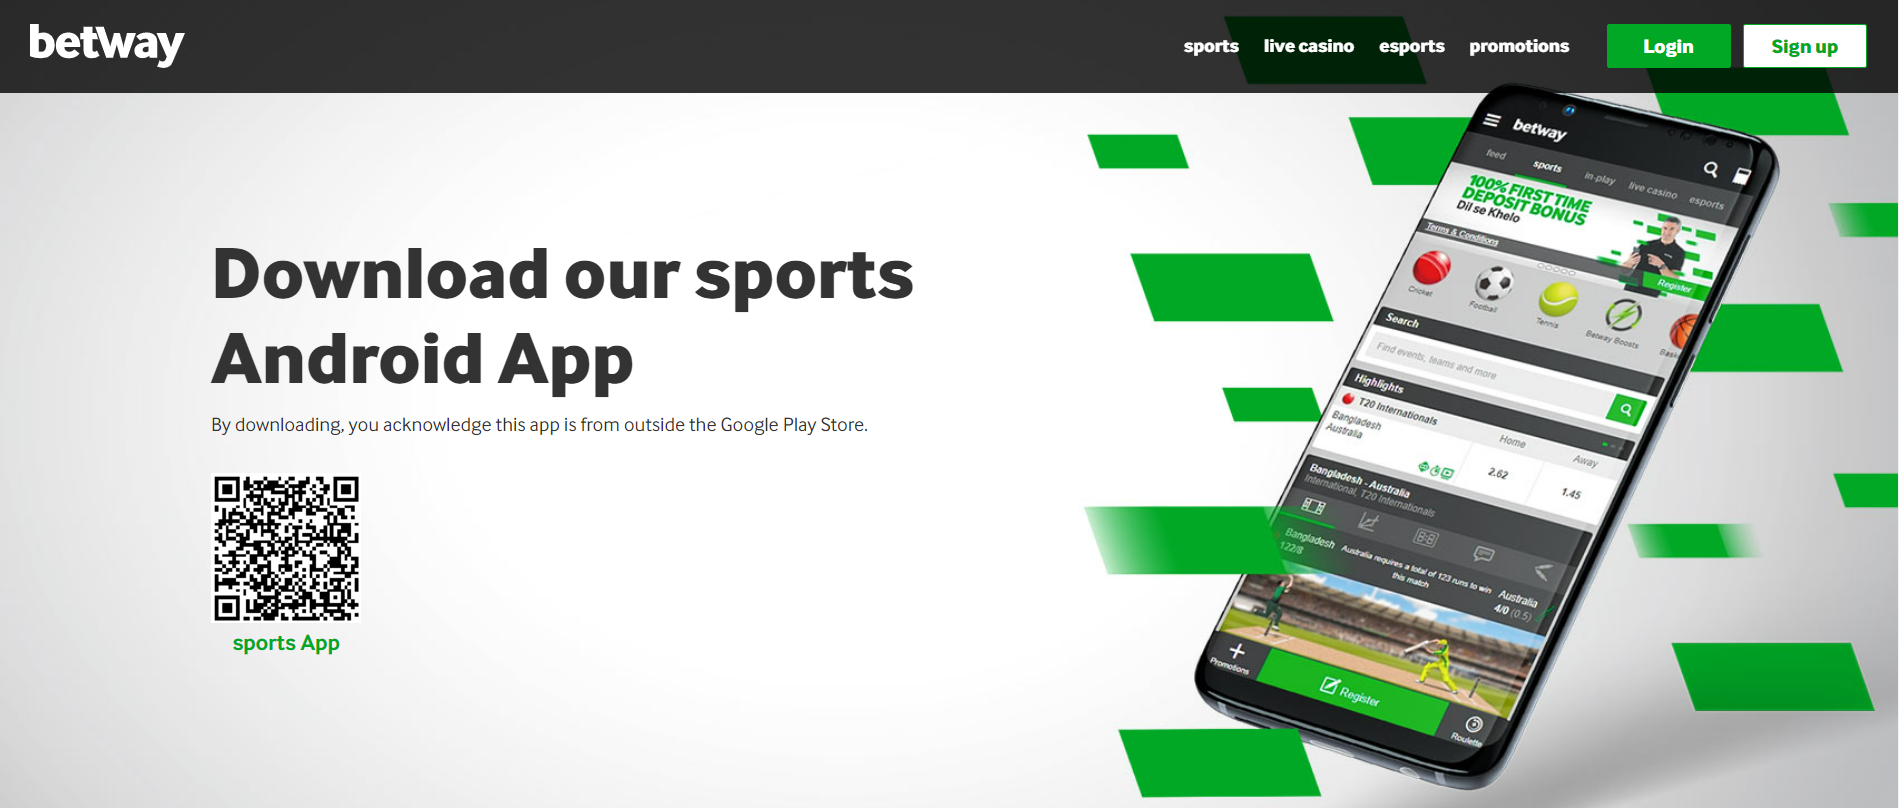 Image of betway features